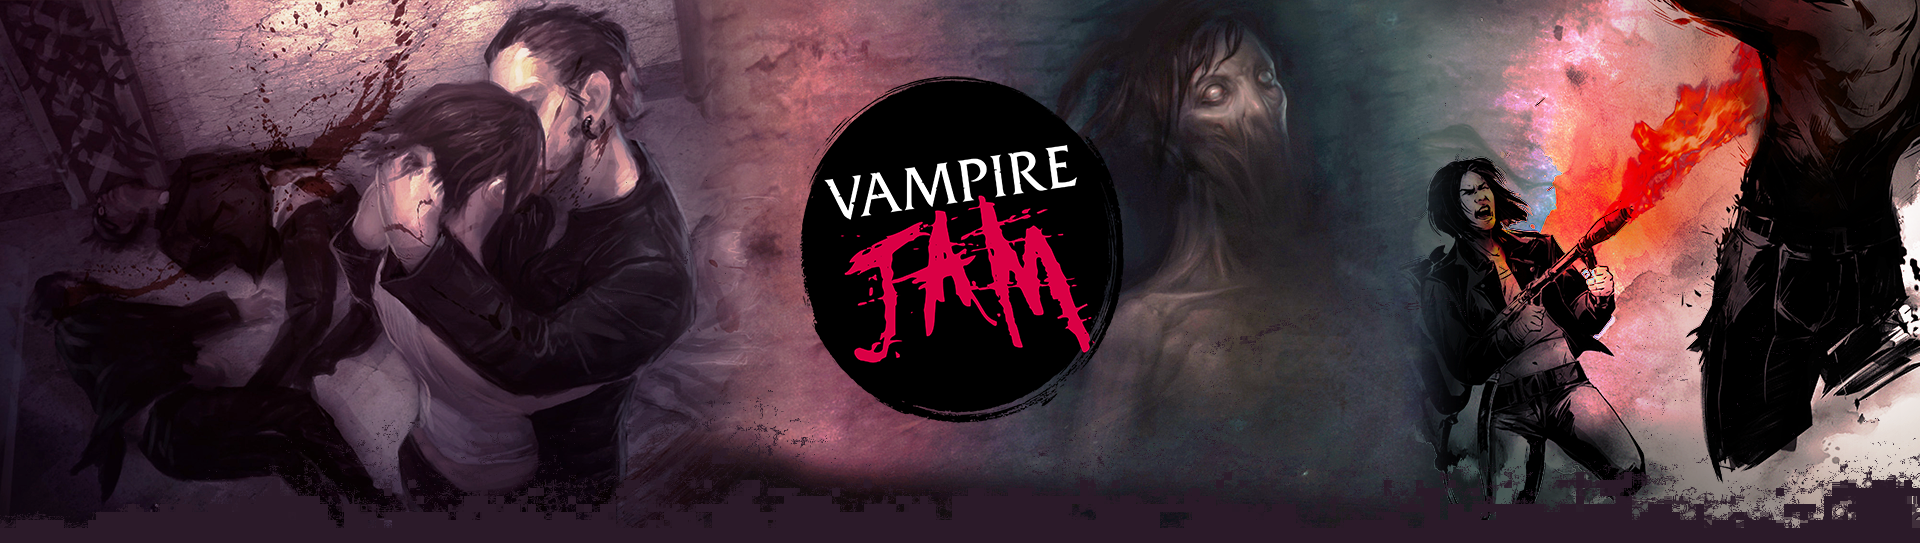 The Only Game In Town - Vampire: the Masquerade 5th Edition now in stock!  ($55) Rediscover this modern horror classic in its latest edition! From  www.worldofdarkness.com: The night has come at last!